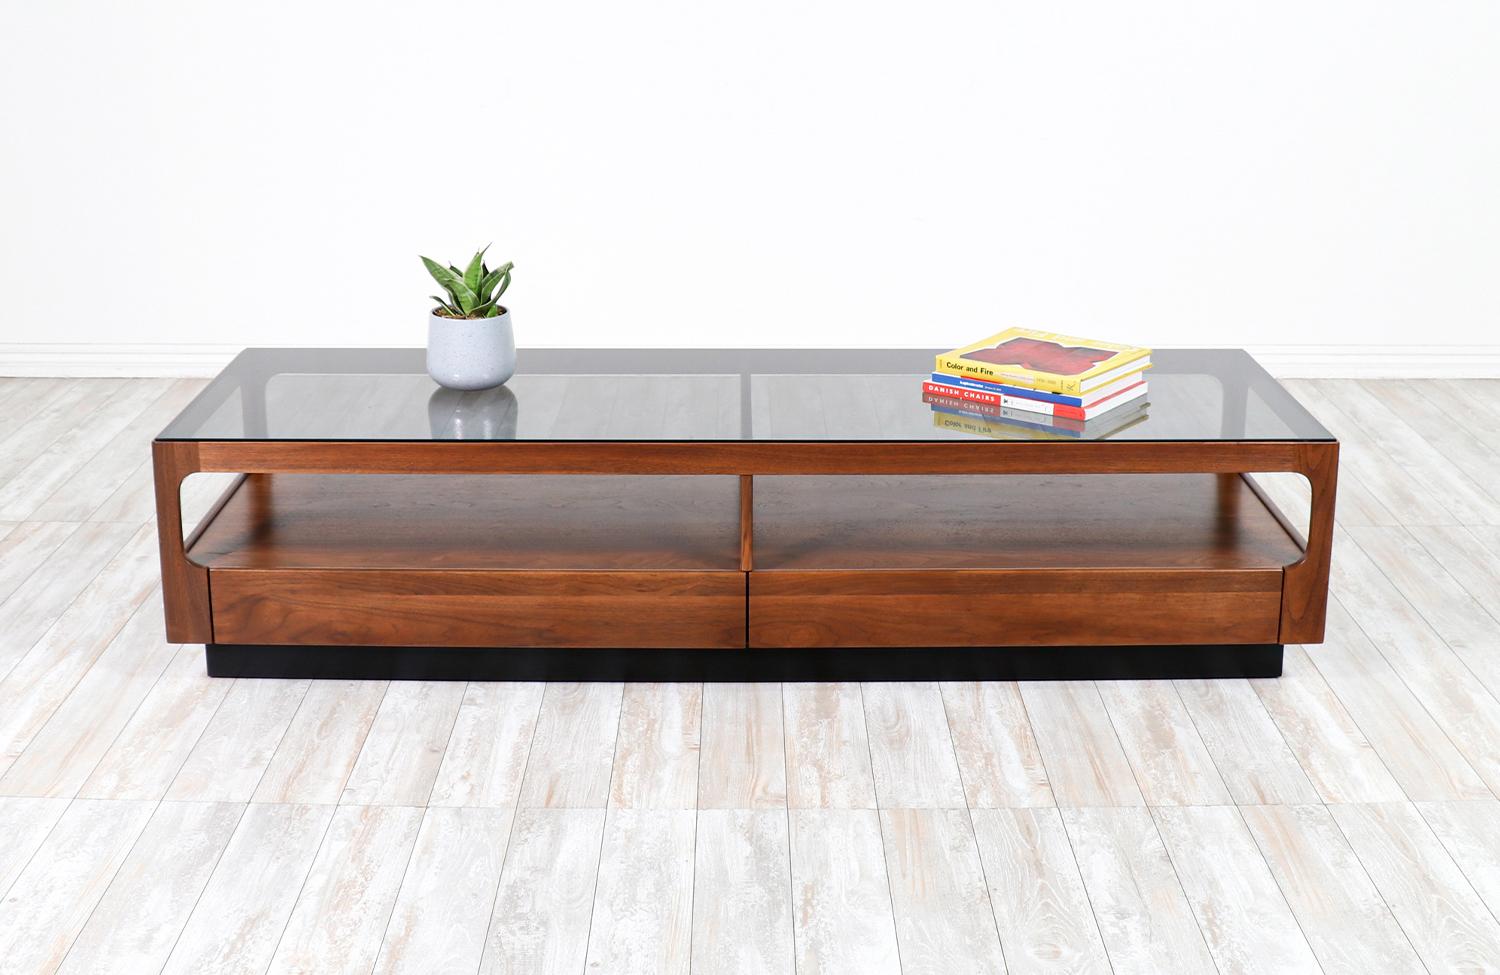 John Keal Smoke Glass & Walnut Coffee Table for Brown Saltman.

________________________________________

Transforming a piece of Mid-Century Modern furniture is like bringing history back to life, and we take this journey with passion and